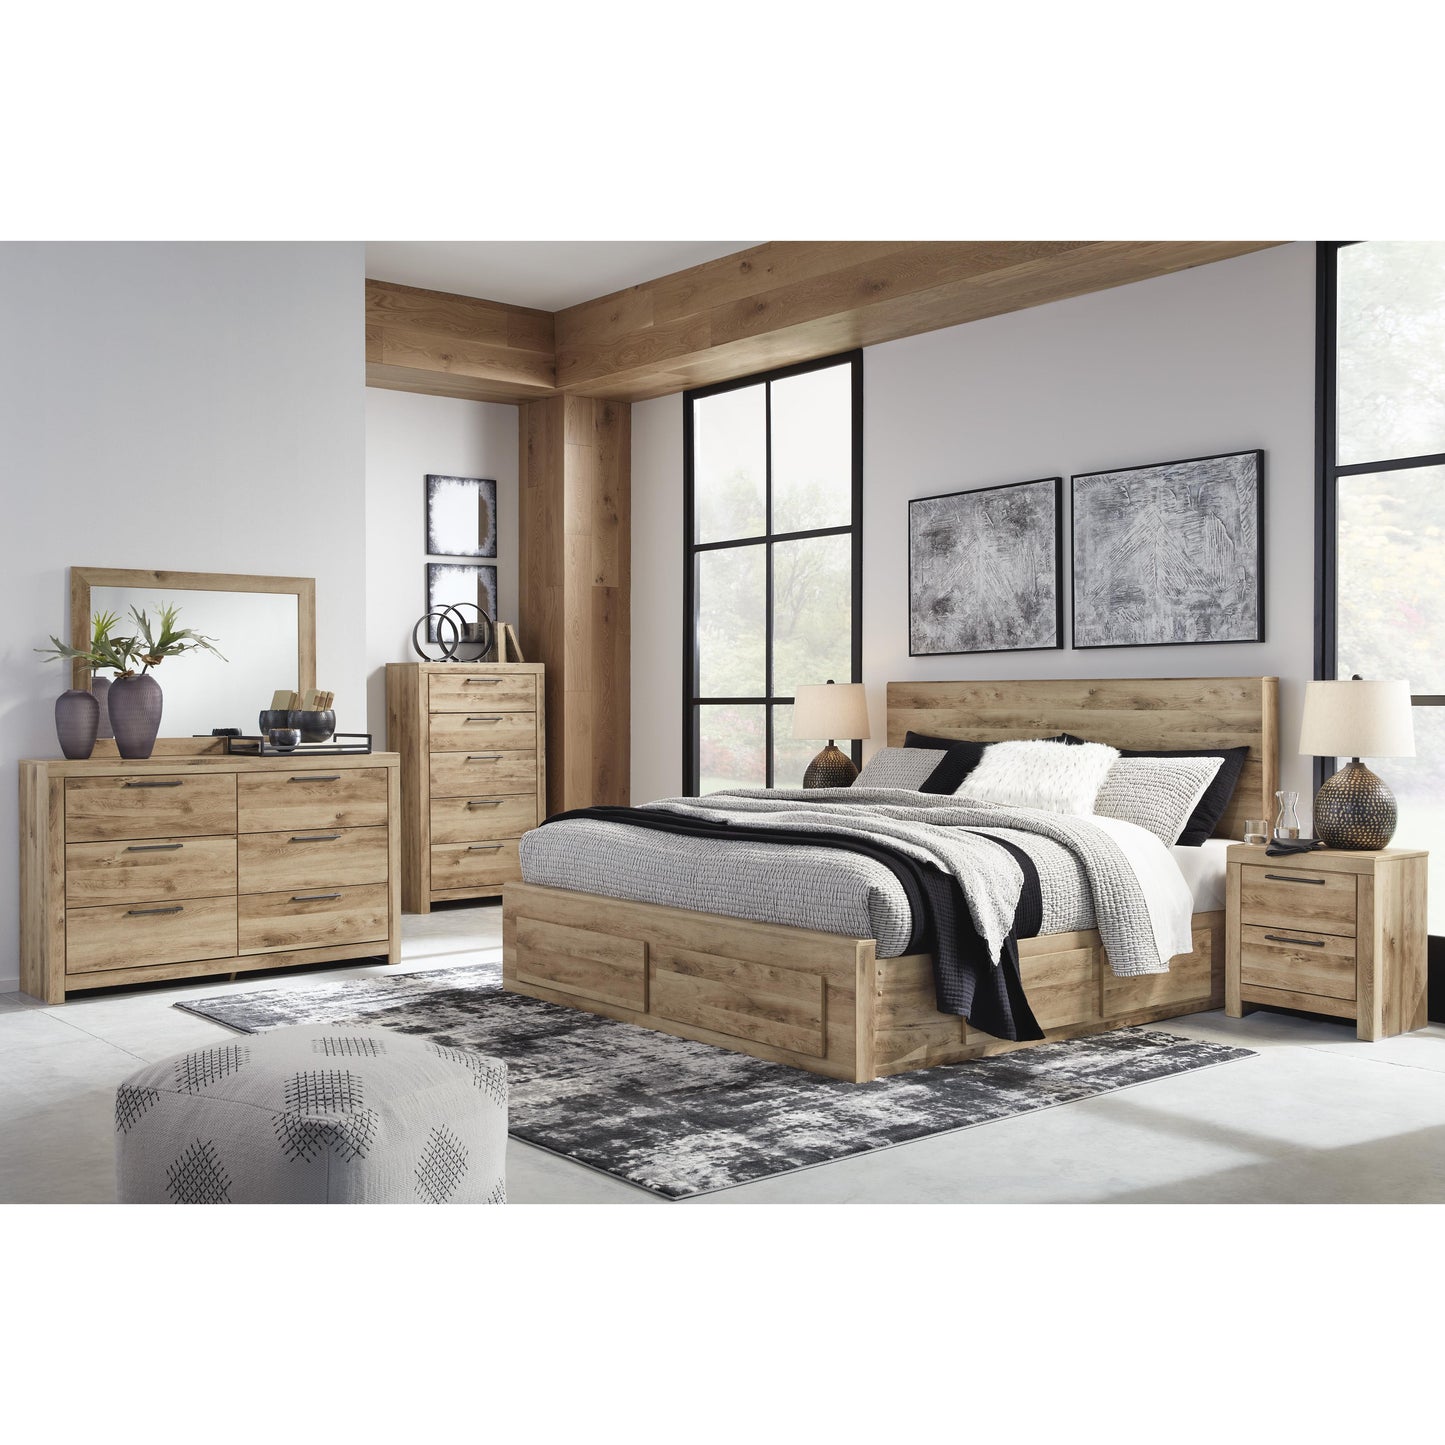 Signature Design by Ashley Hyanna King Panel Bed with Storage B1050-58/B1050-56S/B1050-60/B1050-60/B100-14 IMAGE 6